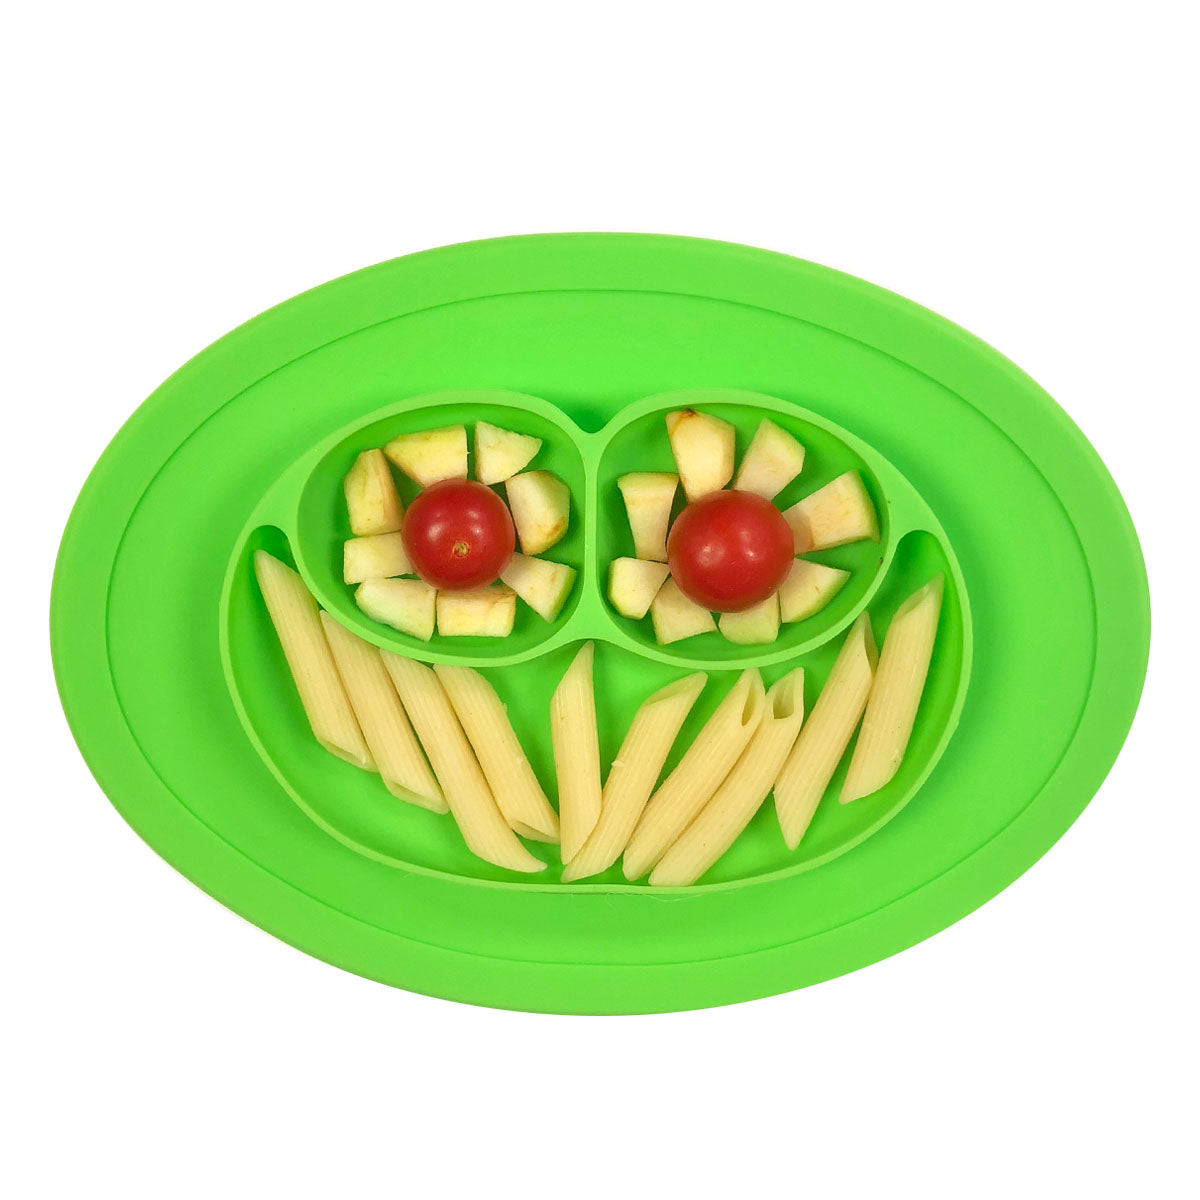 Wrapables Silicone Placemat + Plate for Baby, Suction Divided Food Pla